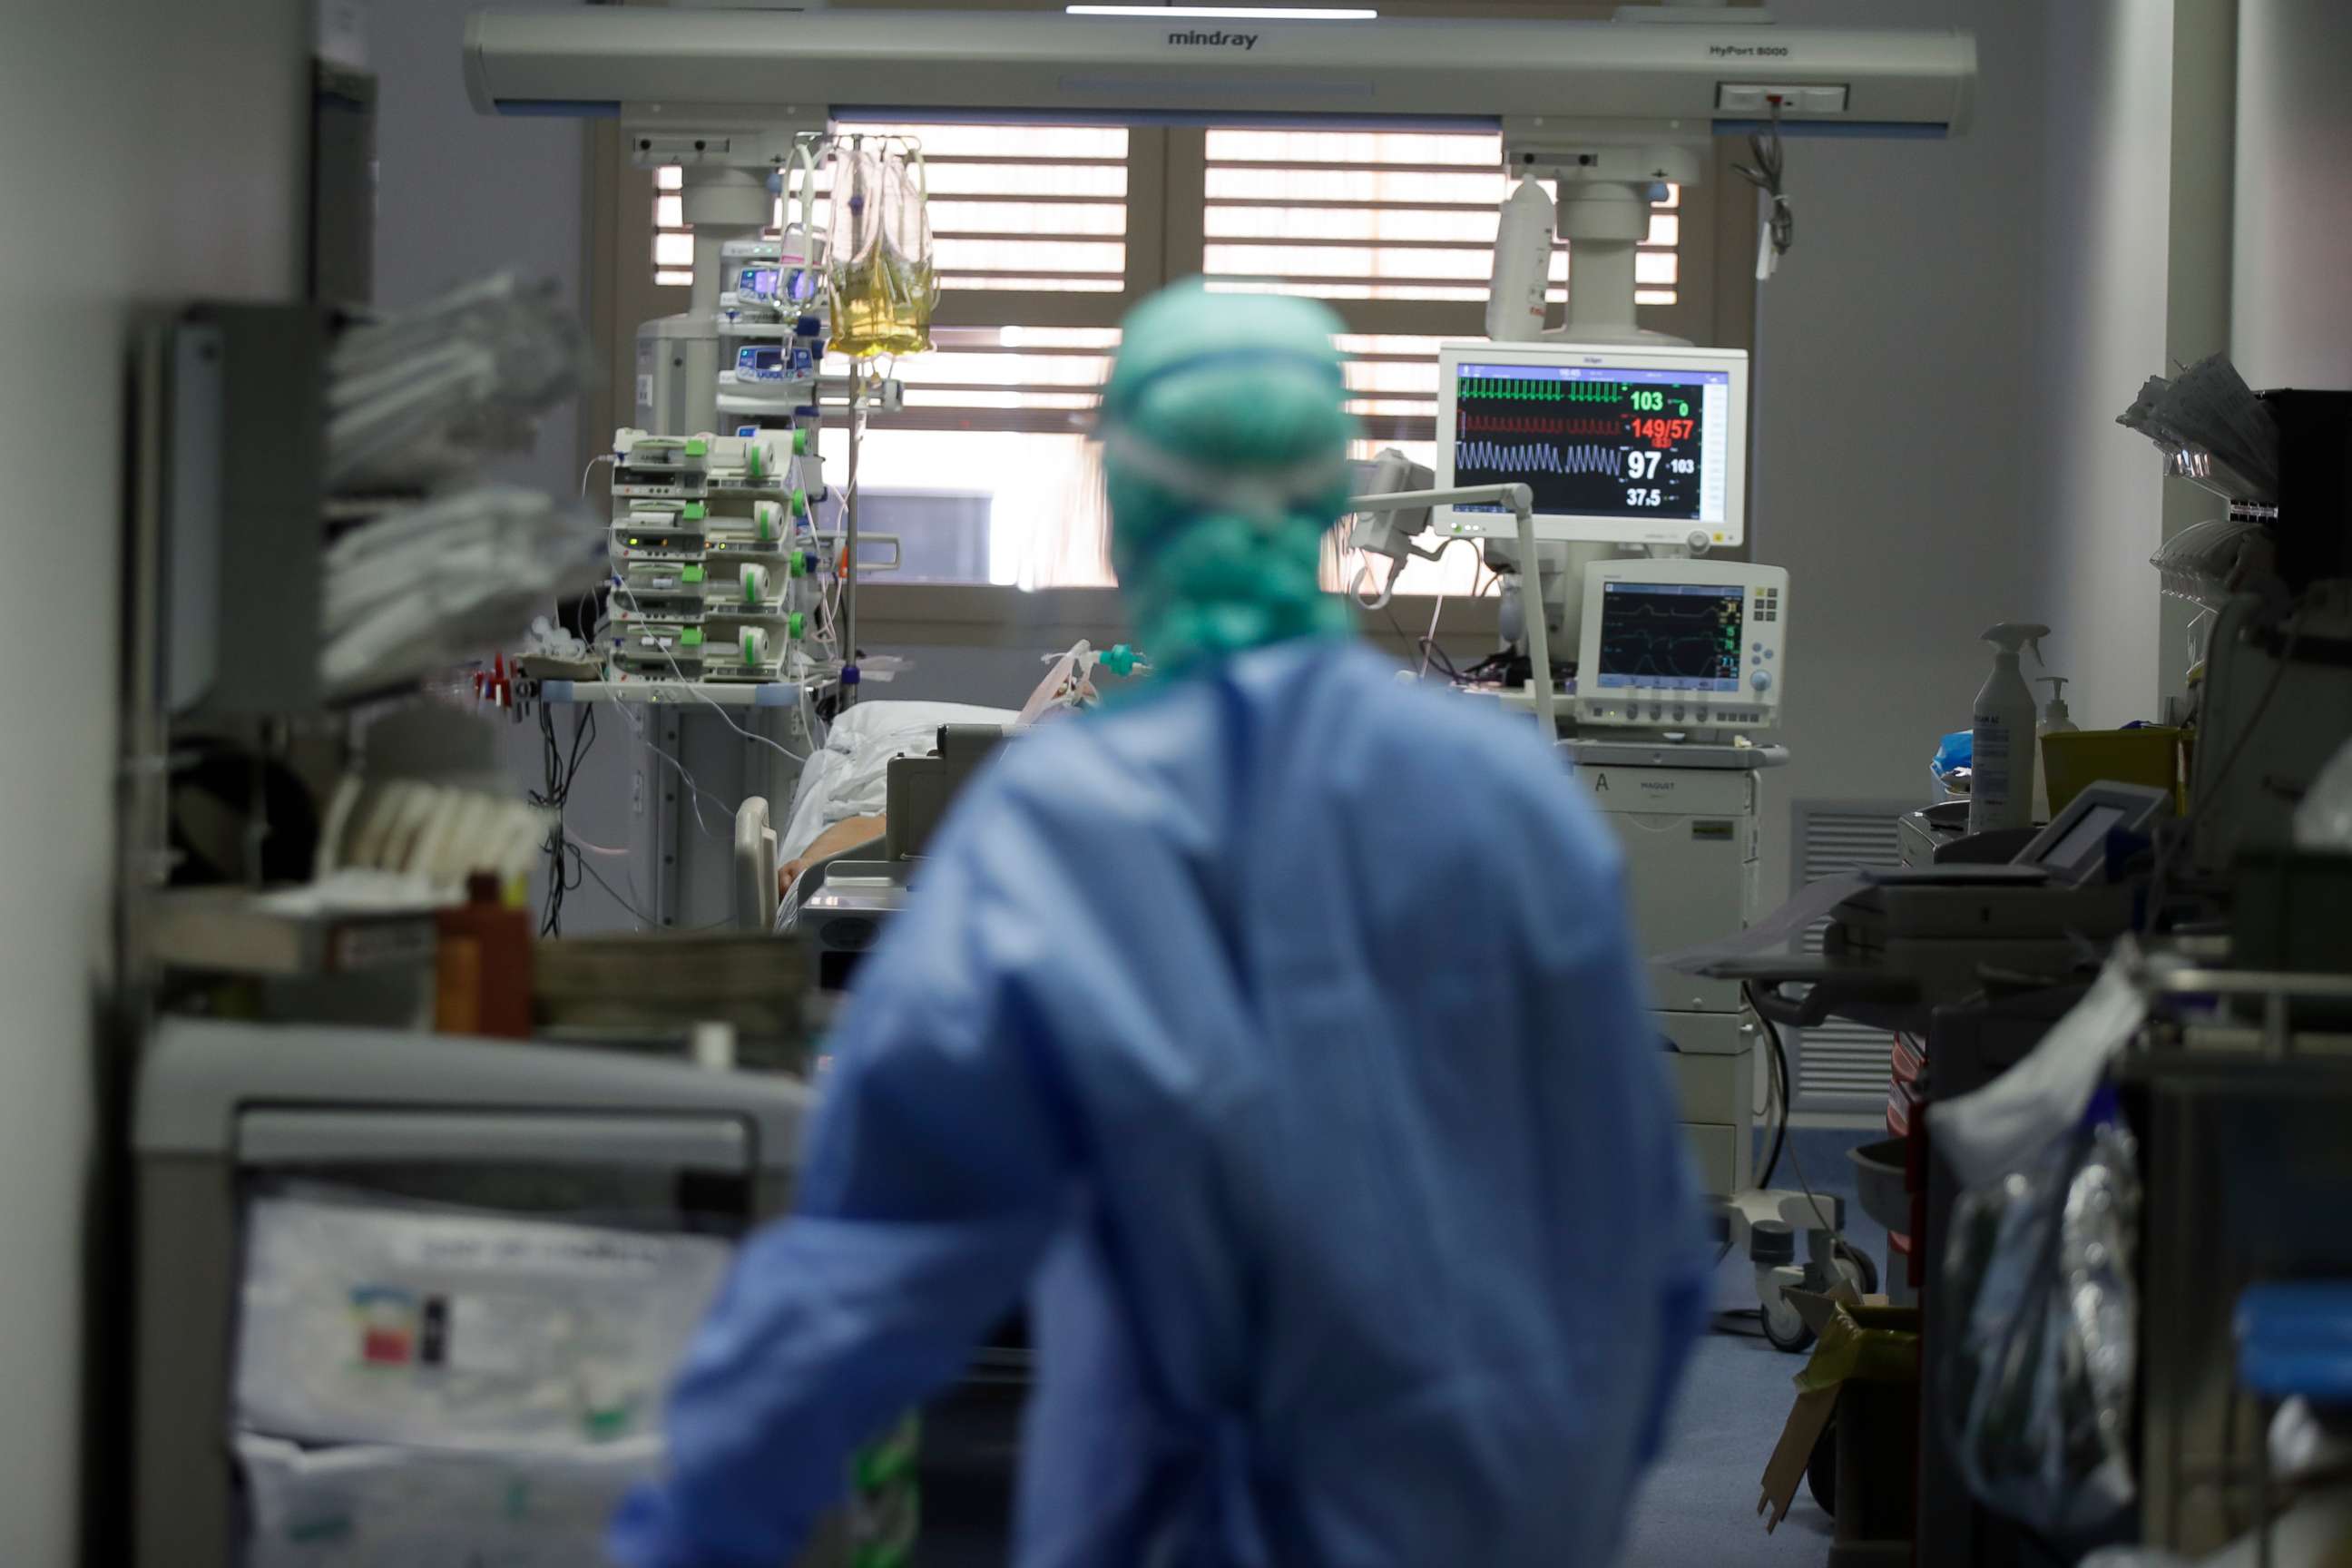 PHOTO: In this photo taken on March 16, 2020, a doctor watches a coronavirus patient under treatment in the intensive care unit of the Brescia hospital in Italy.